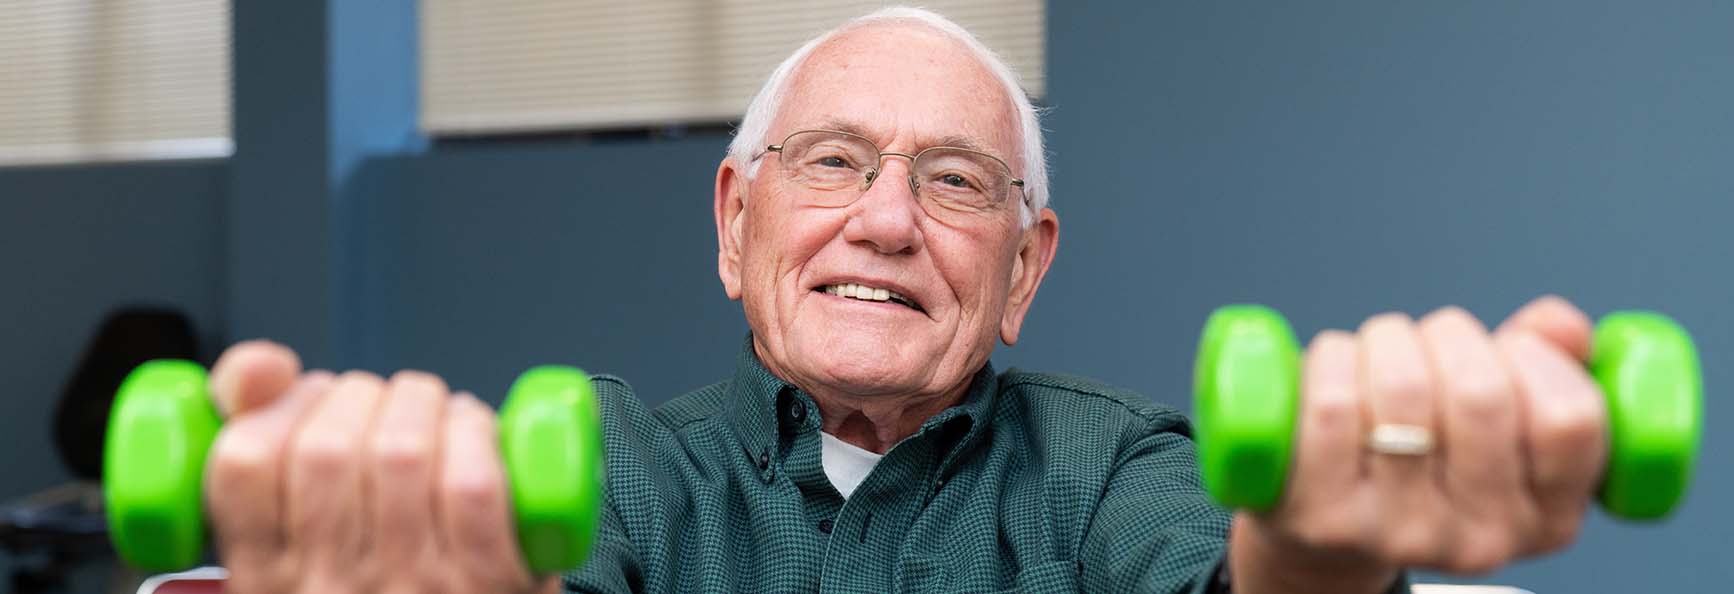 Smiling older male patient holing weights during a physical therapy session